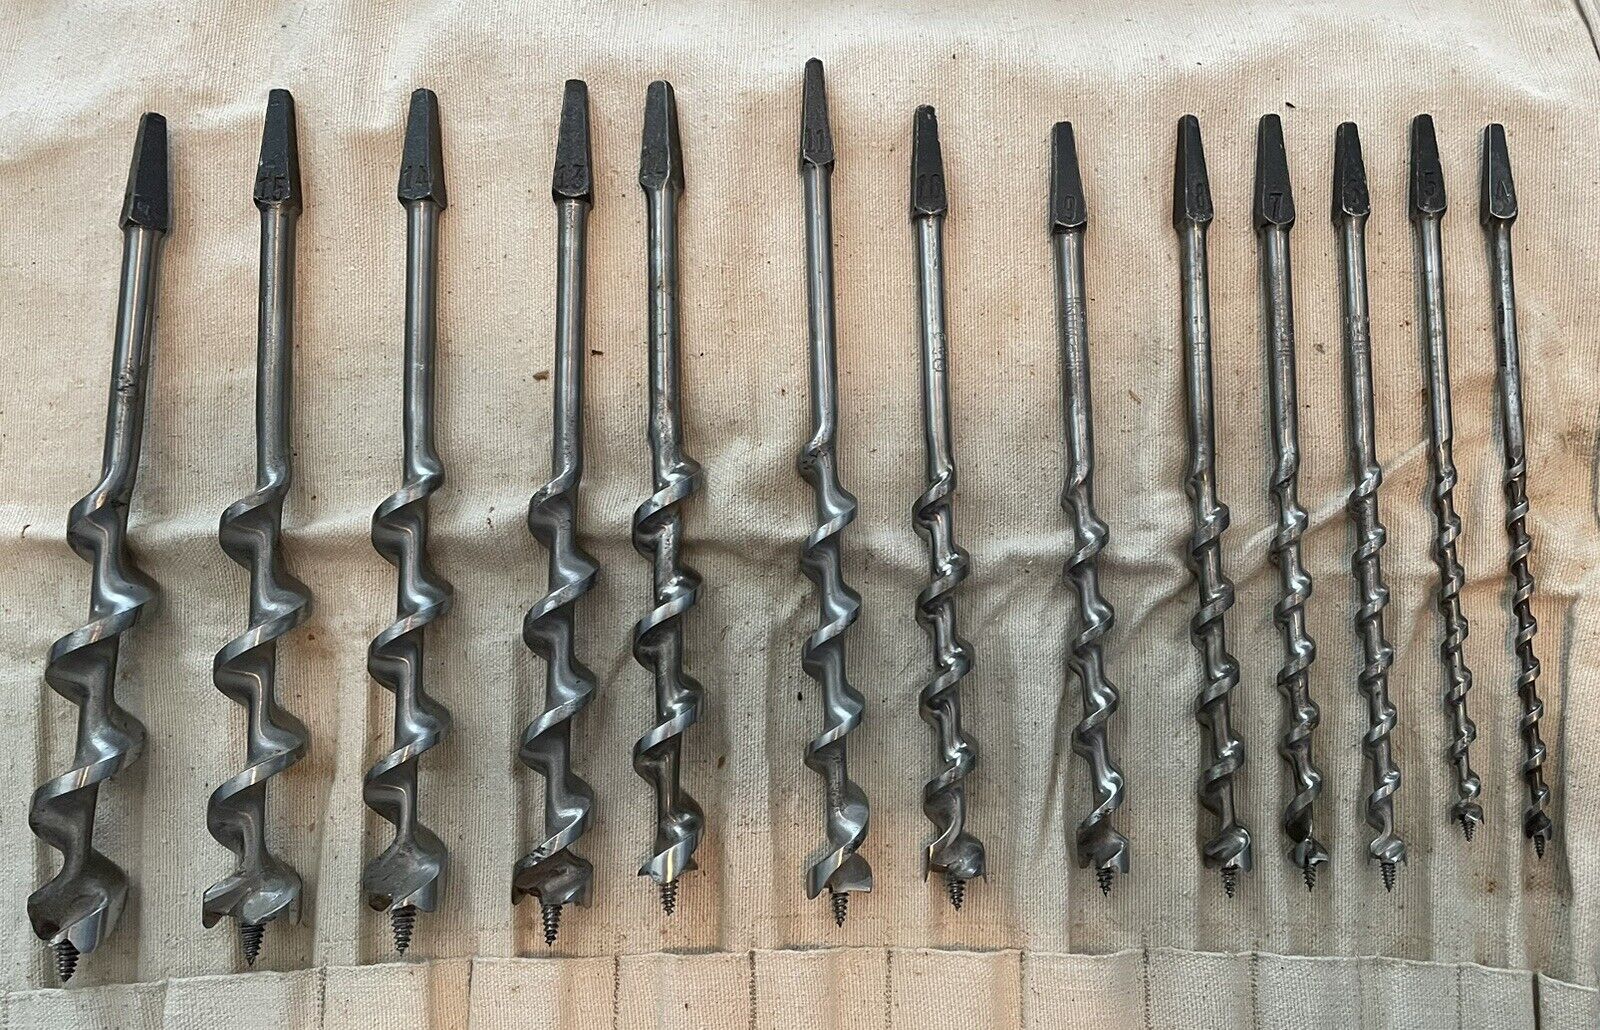 13 Pc Set Of Auger Bits w Canvas Storage Roll For Brace Hand Drill Irwin Stanley